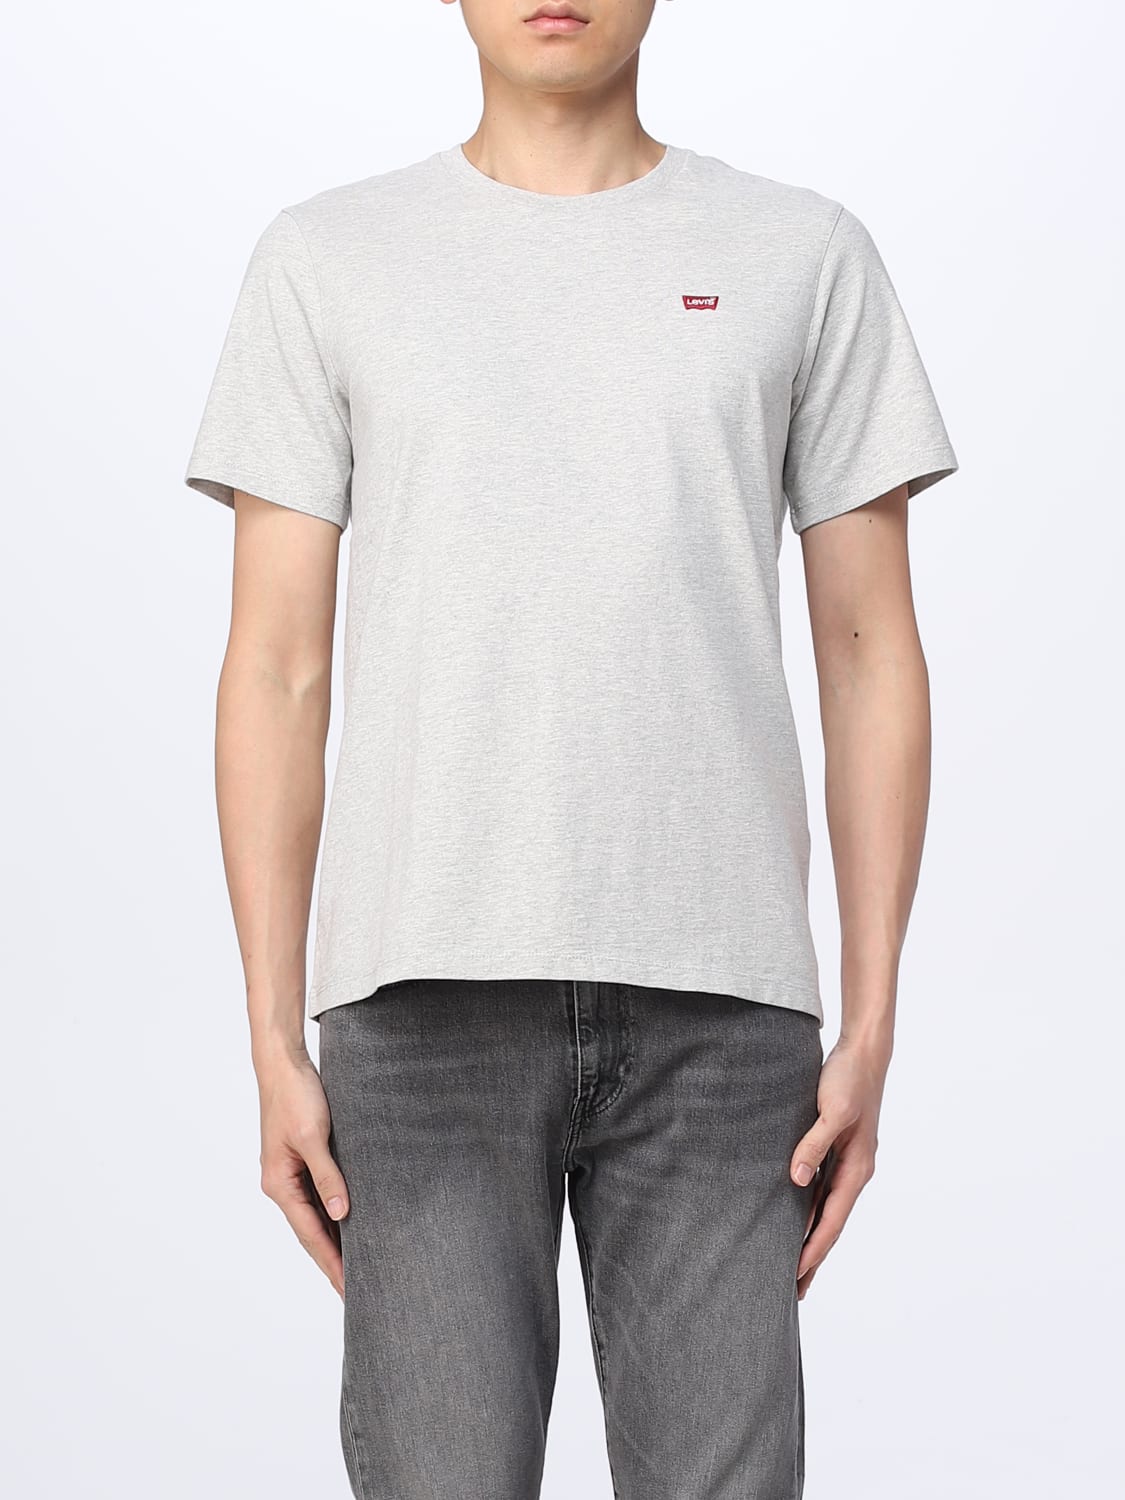 LEVI'S: t-shirt for man - Grey | Levi's t-shirt 566050130 online on ...